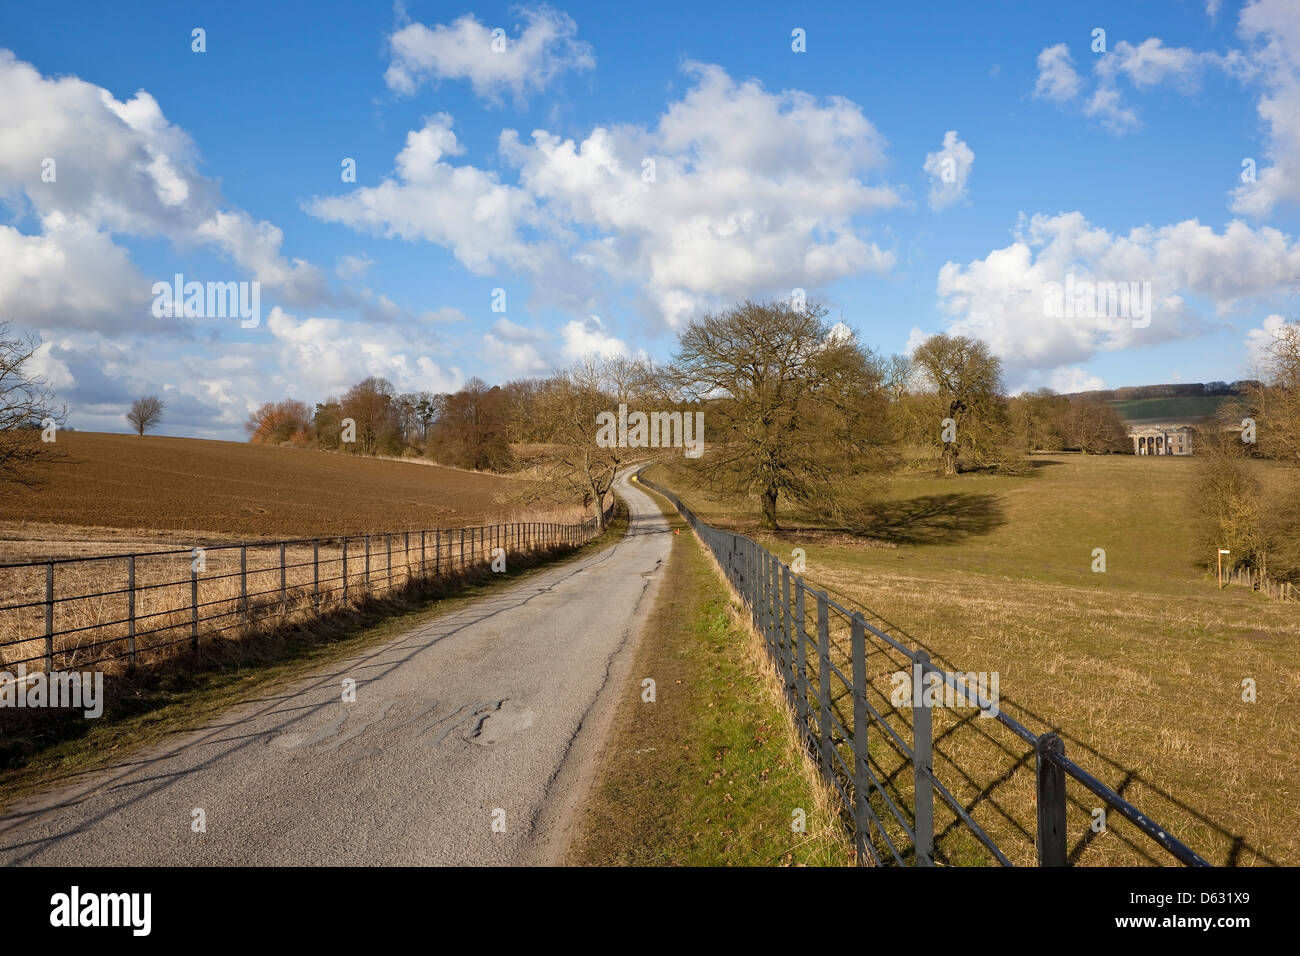 Yorkshire wolds landscape with a road through scenic parkland with iron railings and trees under a blue sky with clouds. Stock Photo